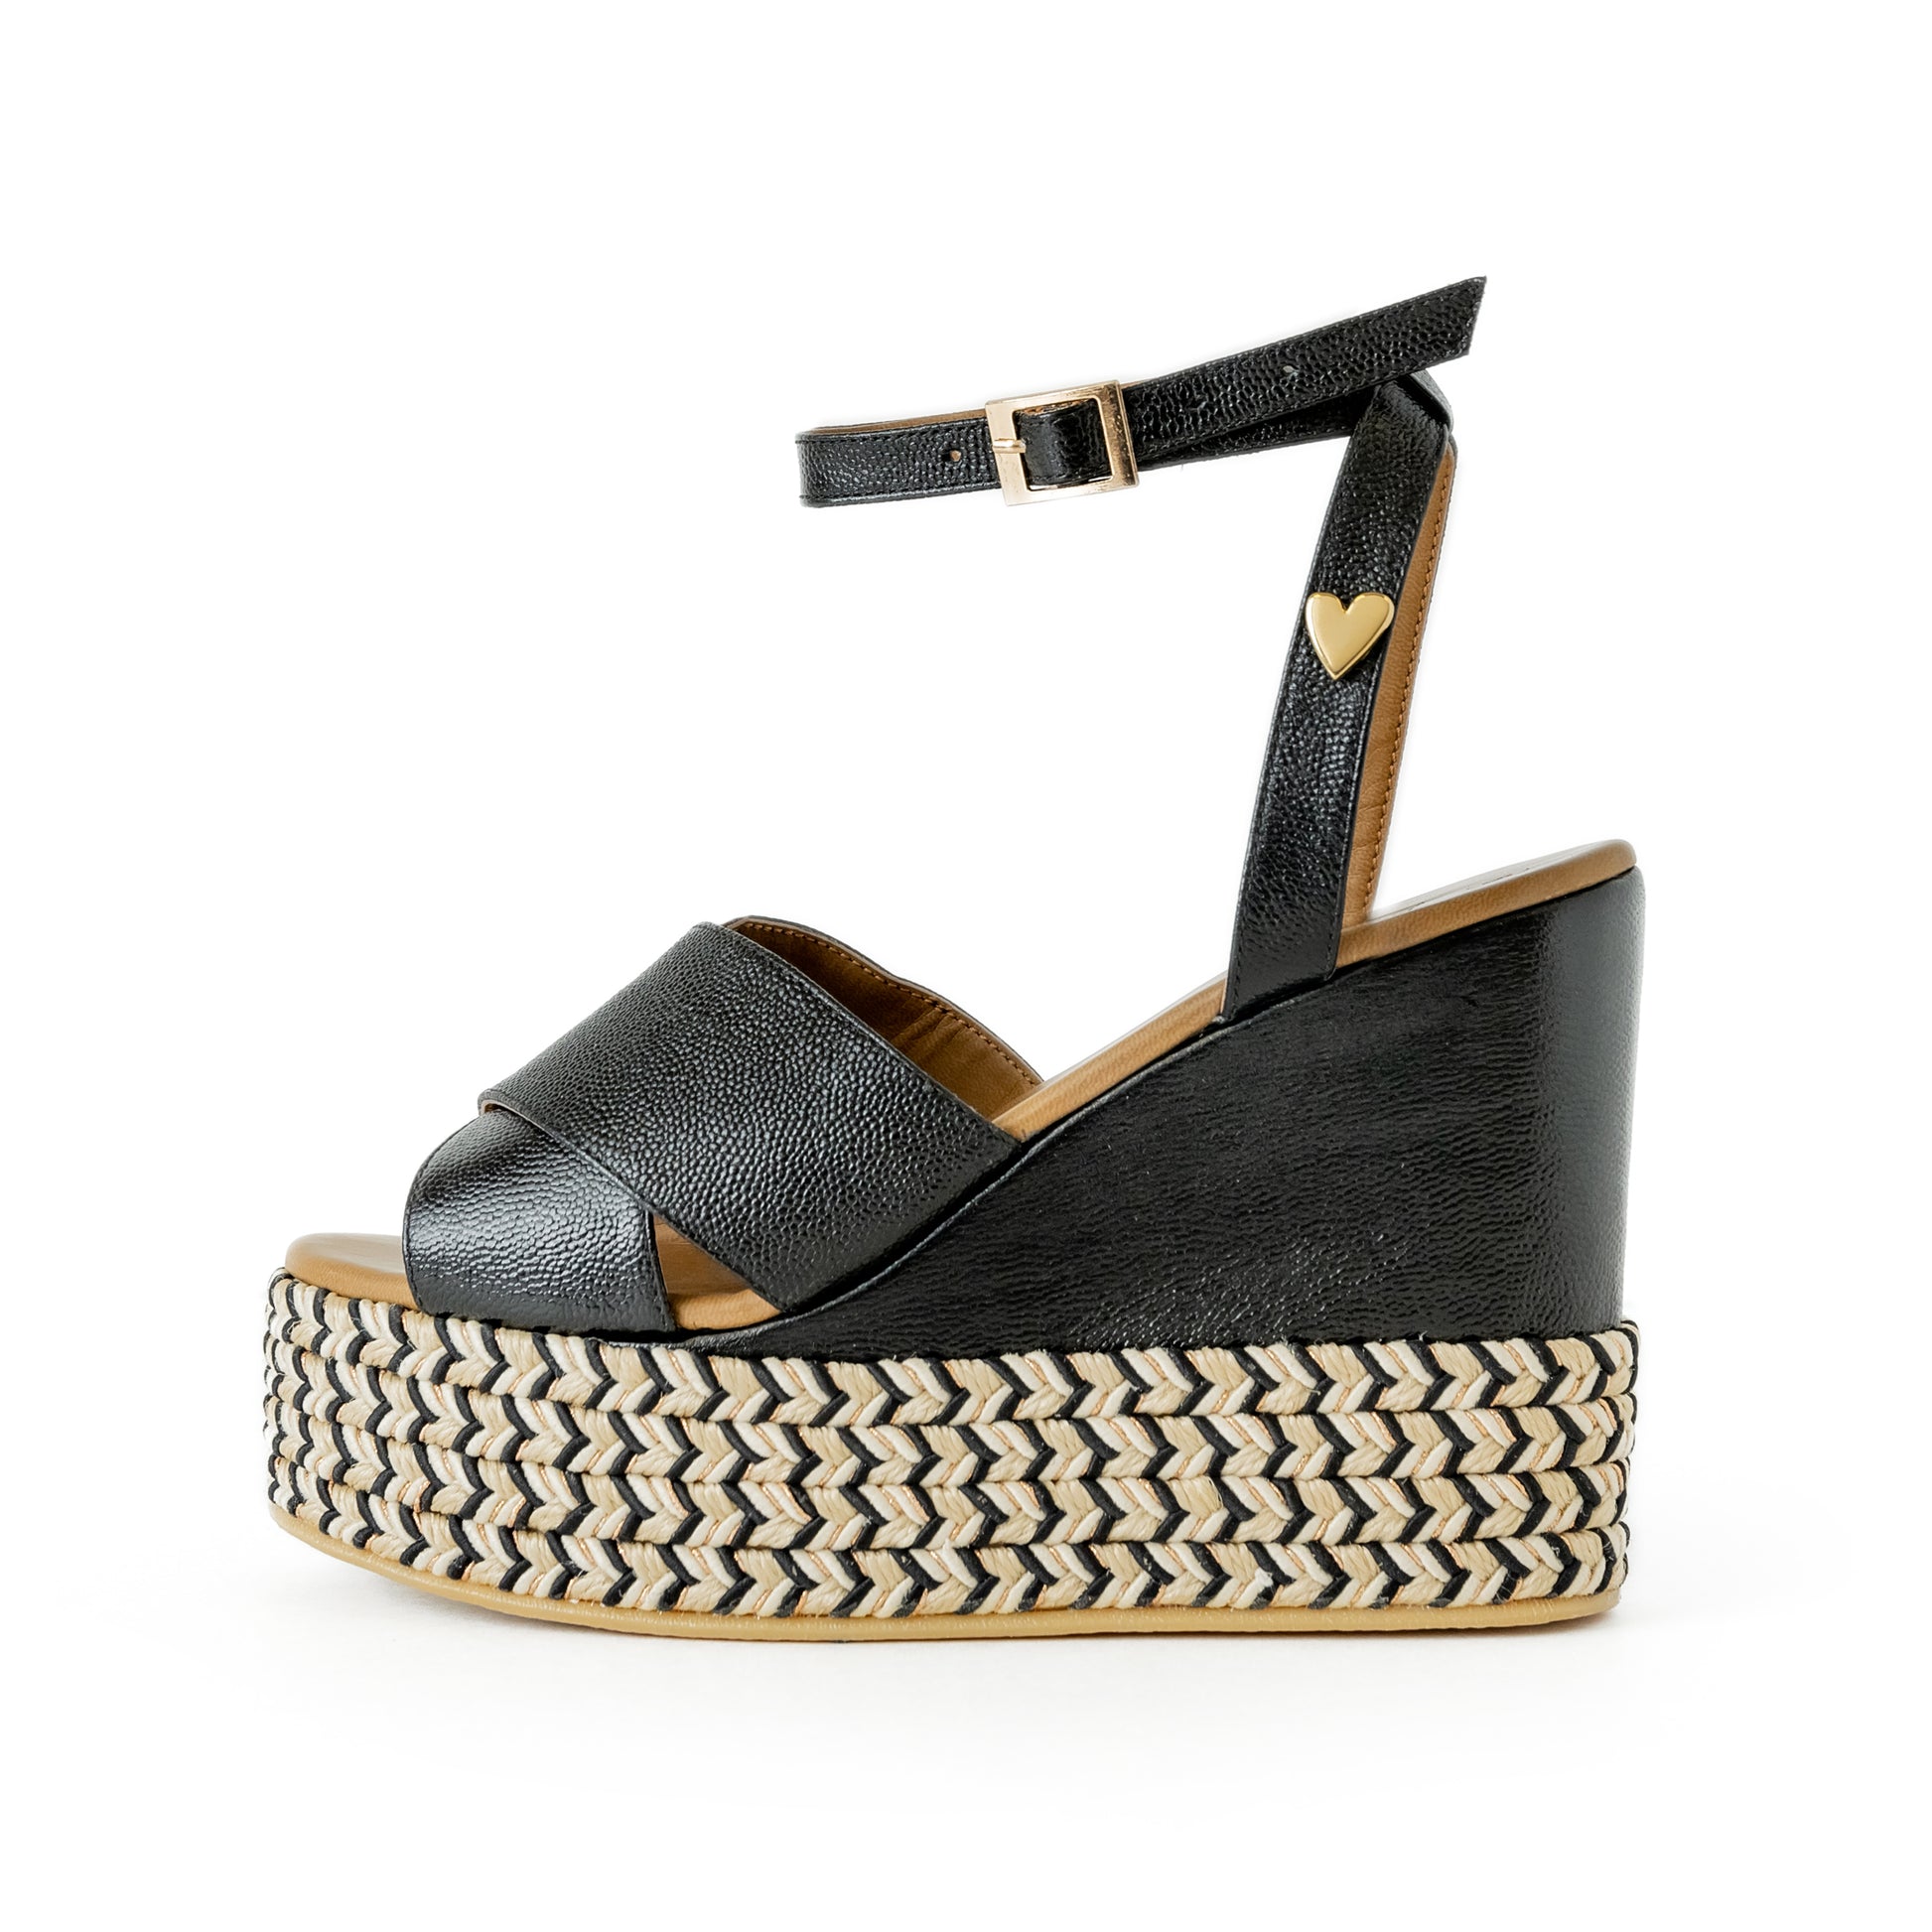 Masha Sandals by Nataly Mendez FEATURES  Genuine leather upper material Genuine leather insole lining Flexible rubber sole Handmade 4.75 inch high heel 1.5 inch platform